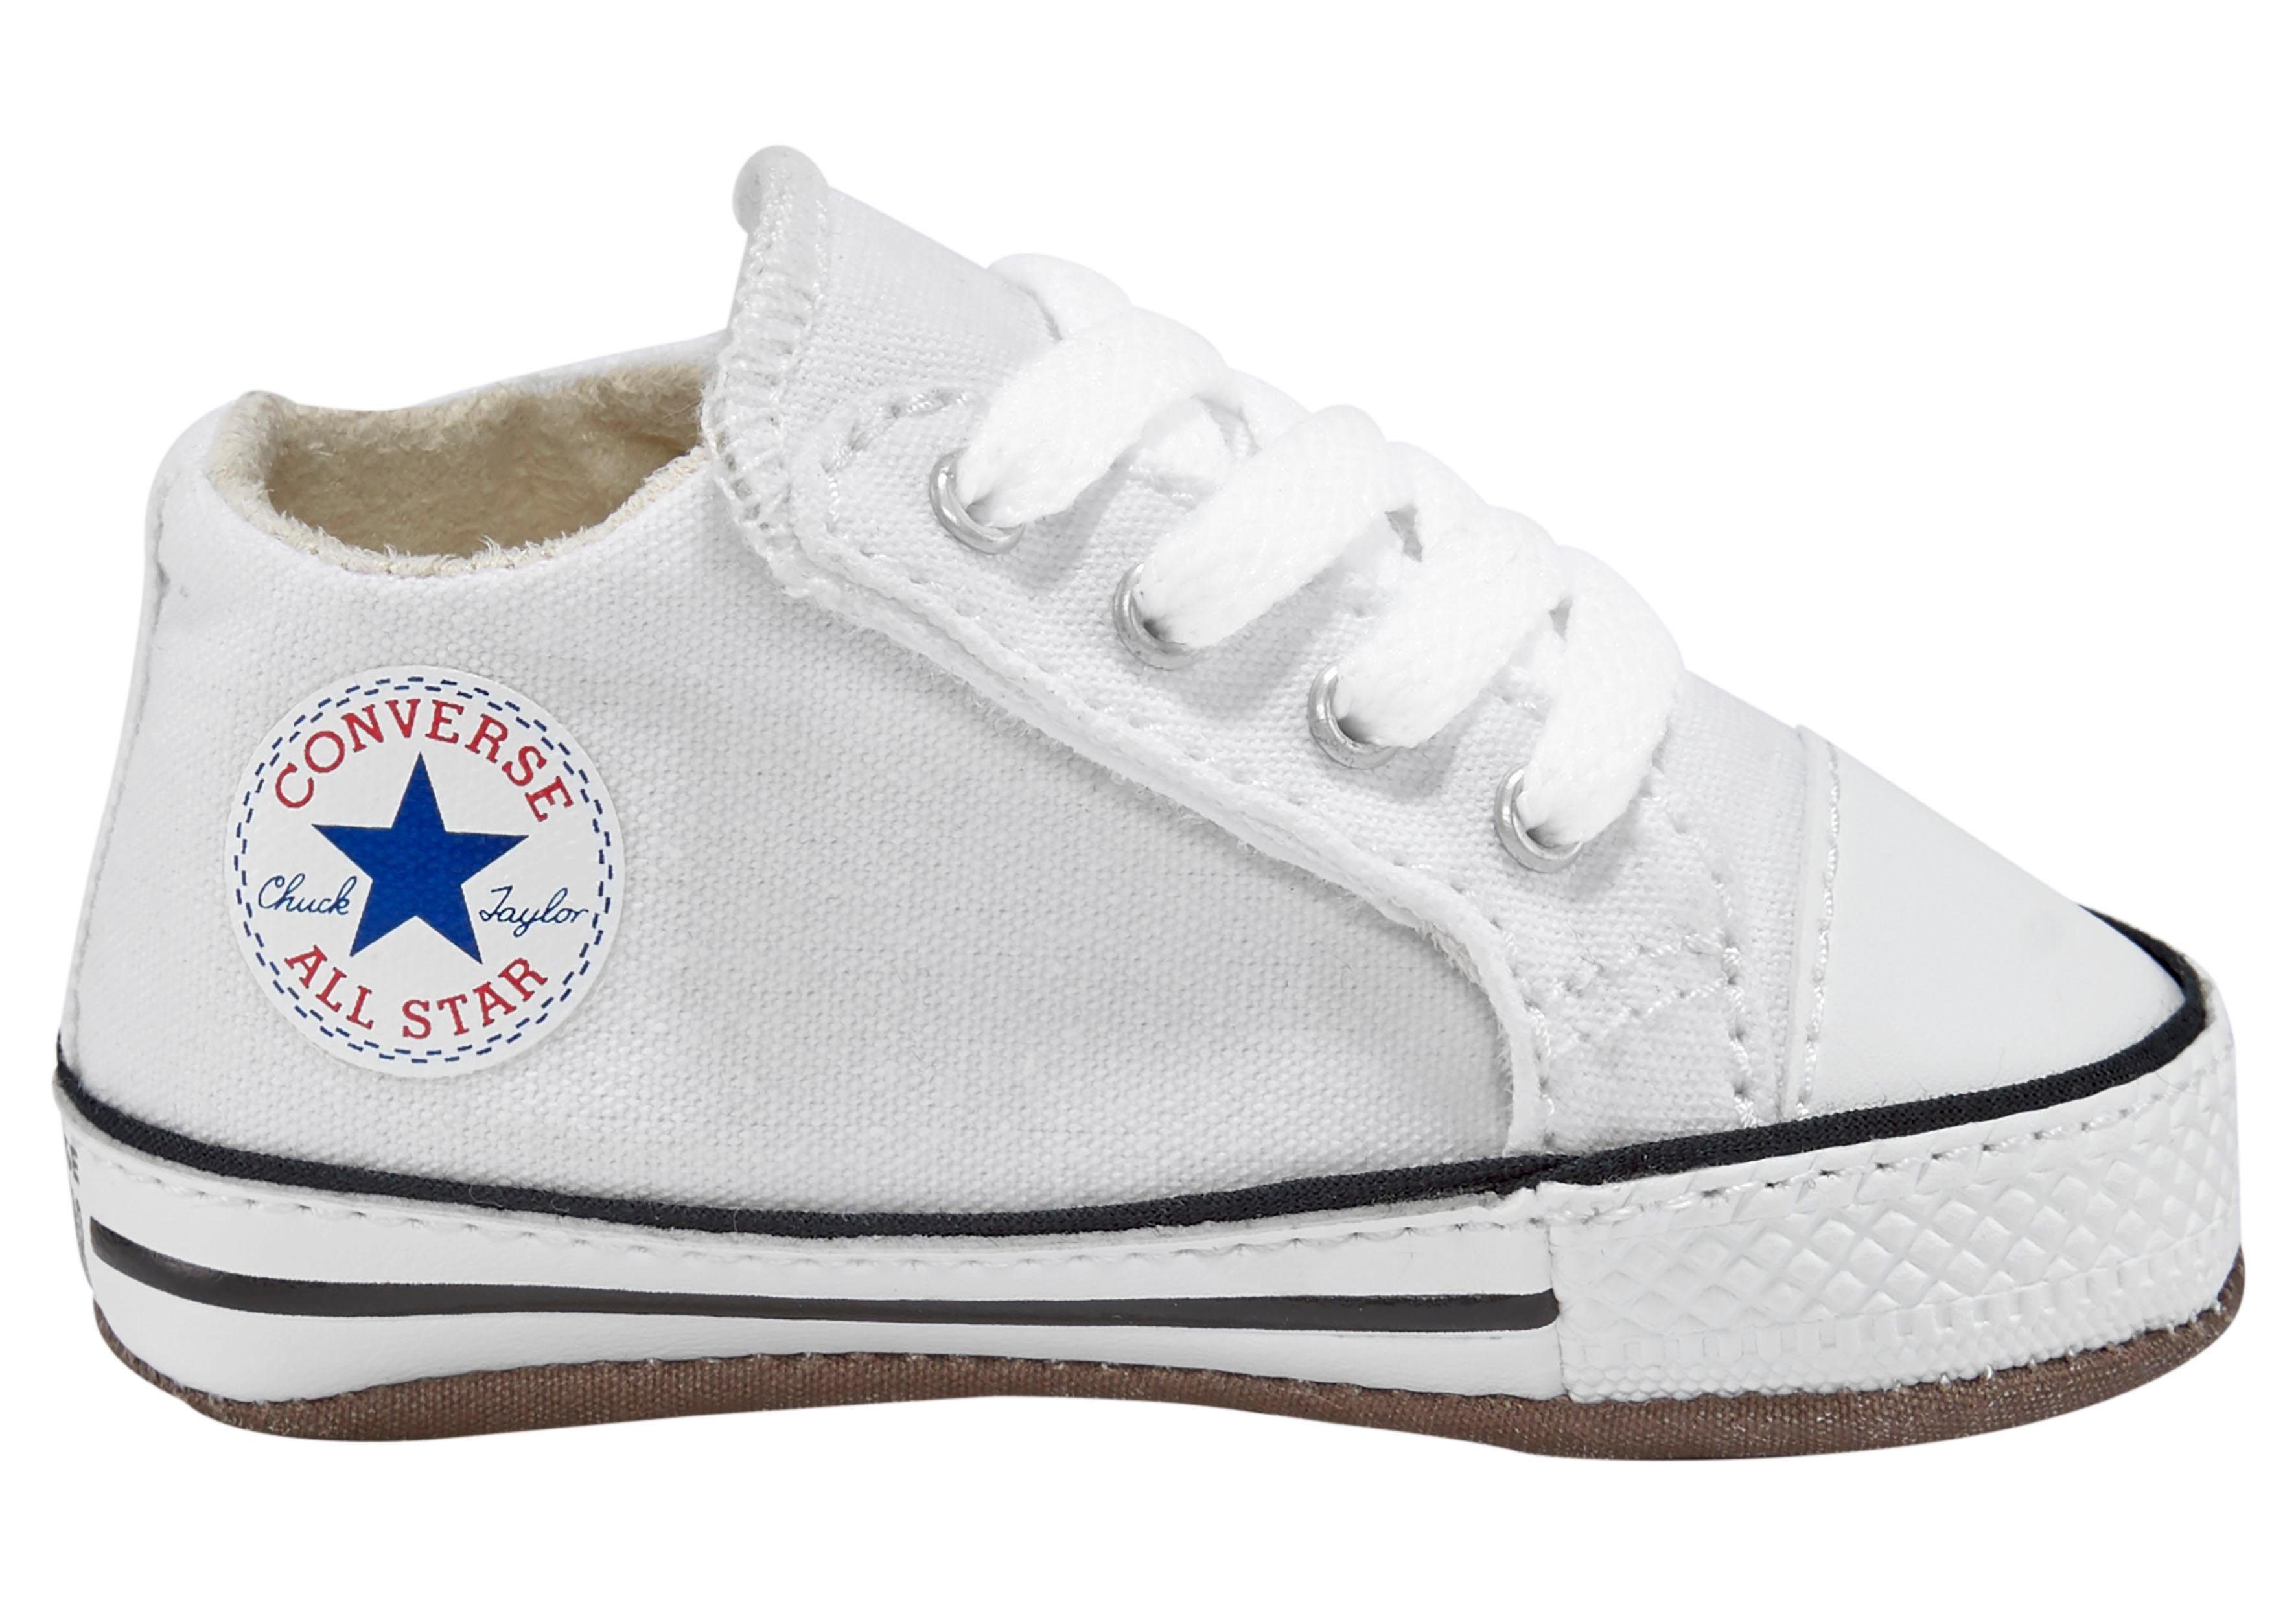 Converse Ctas Cribster Mid babysneakers wit